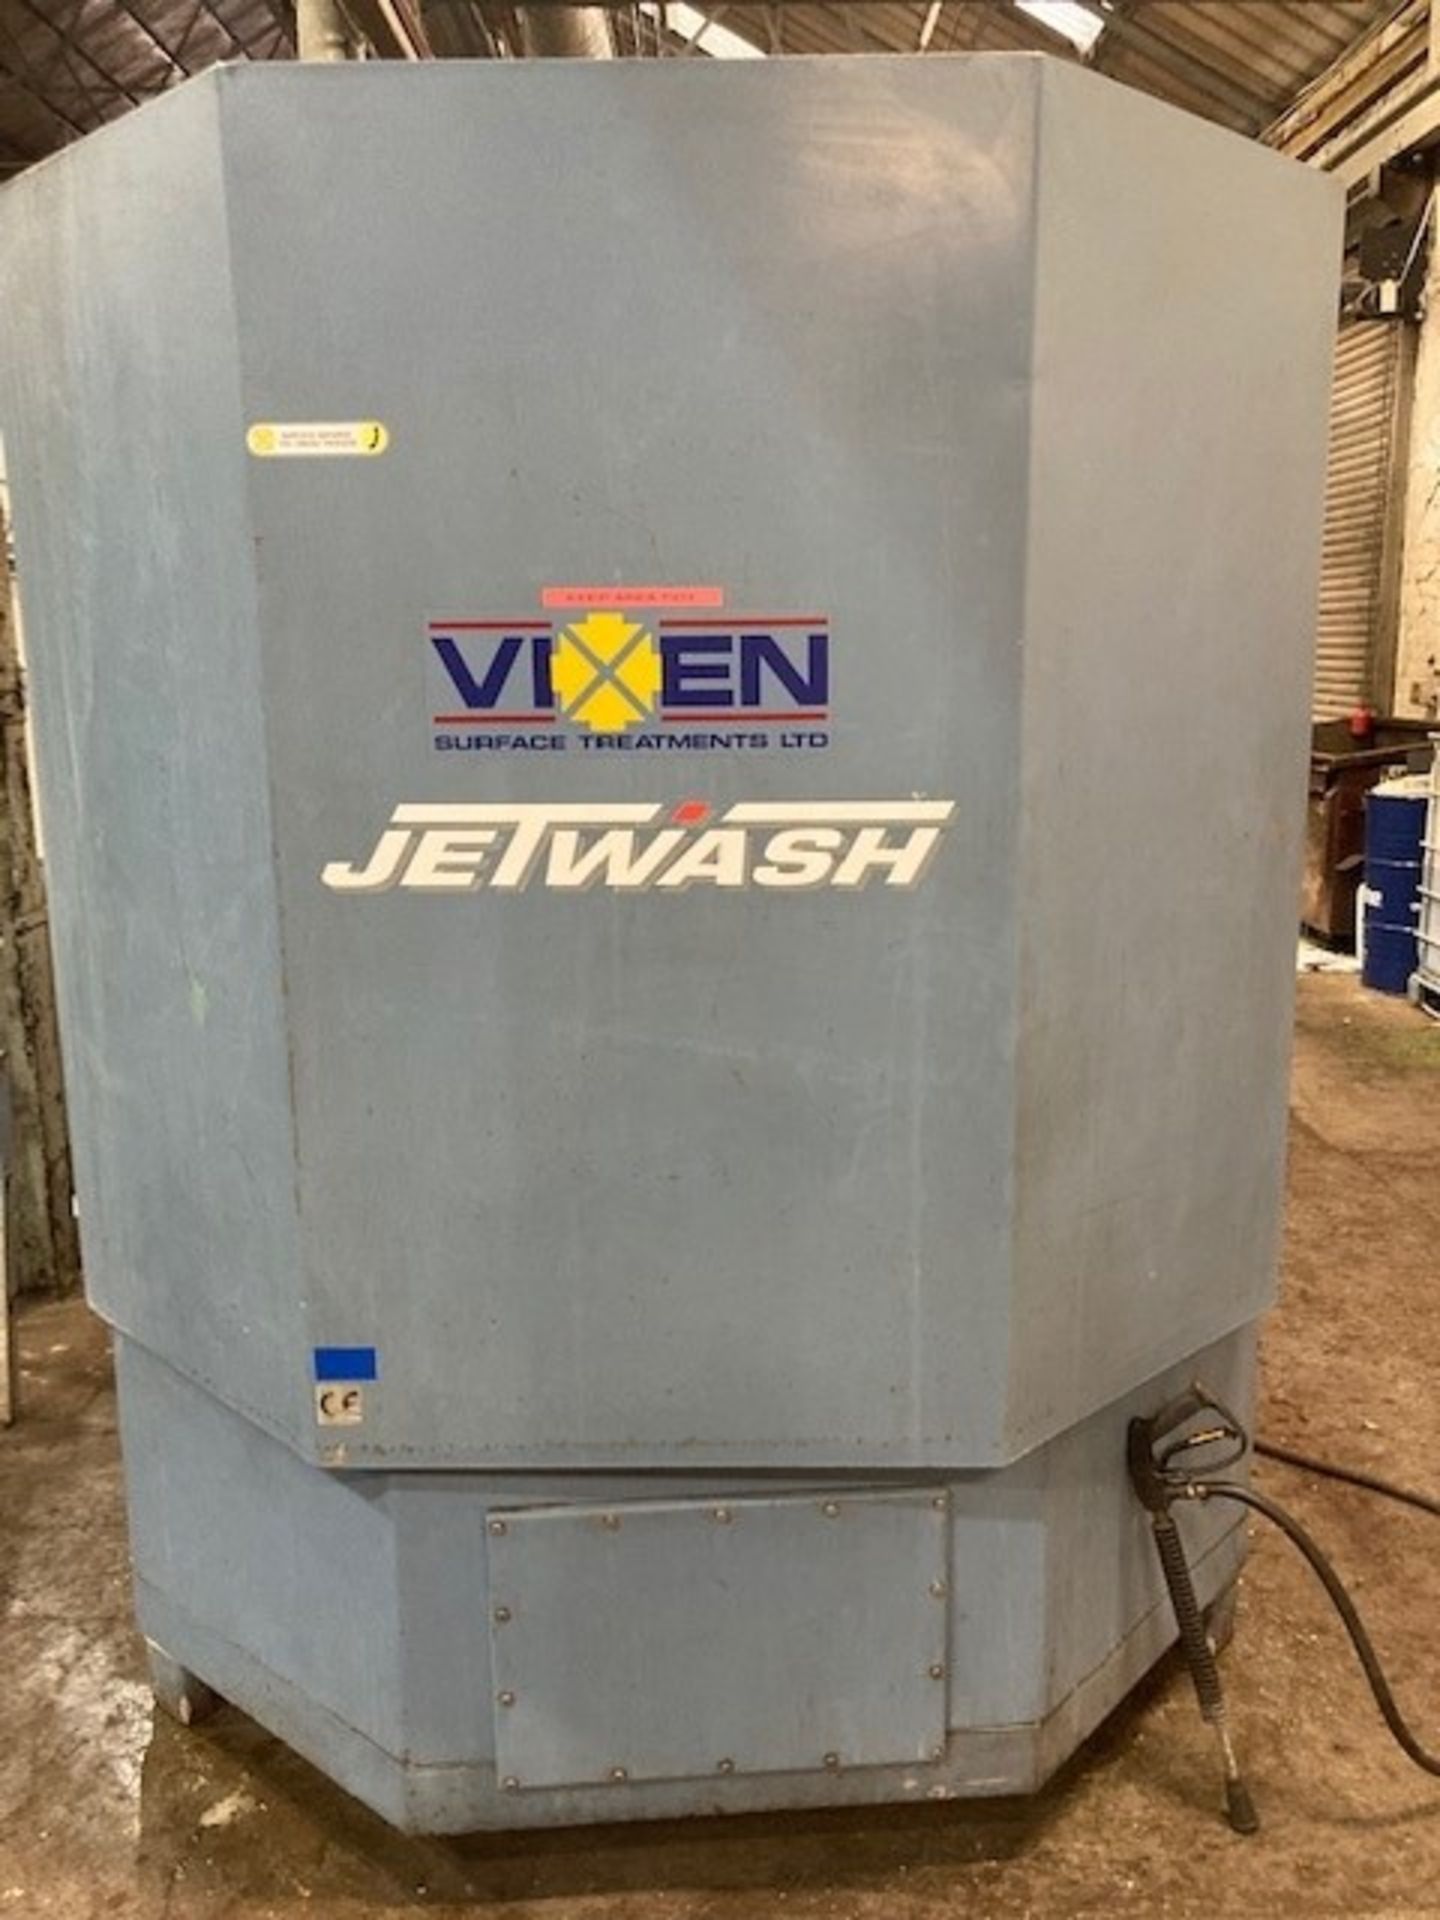 Vixen CL-1500 Large Component washing and degreasing Jetwash Carousel - Image 4 of 10